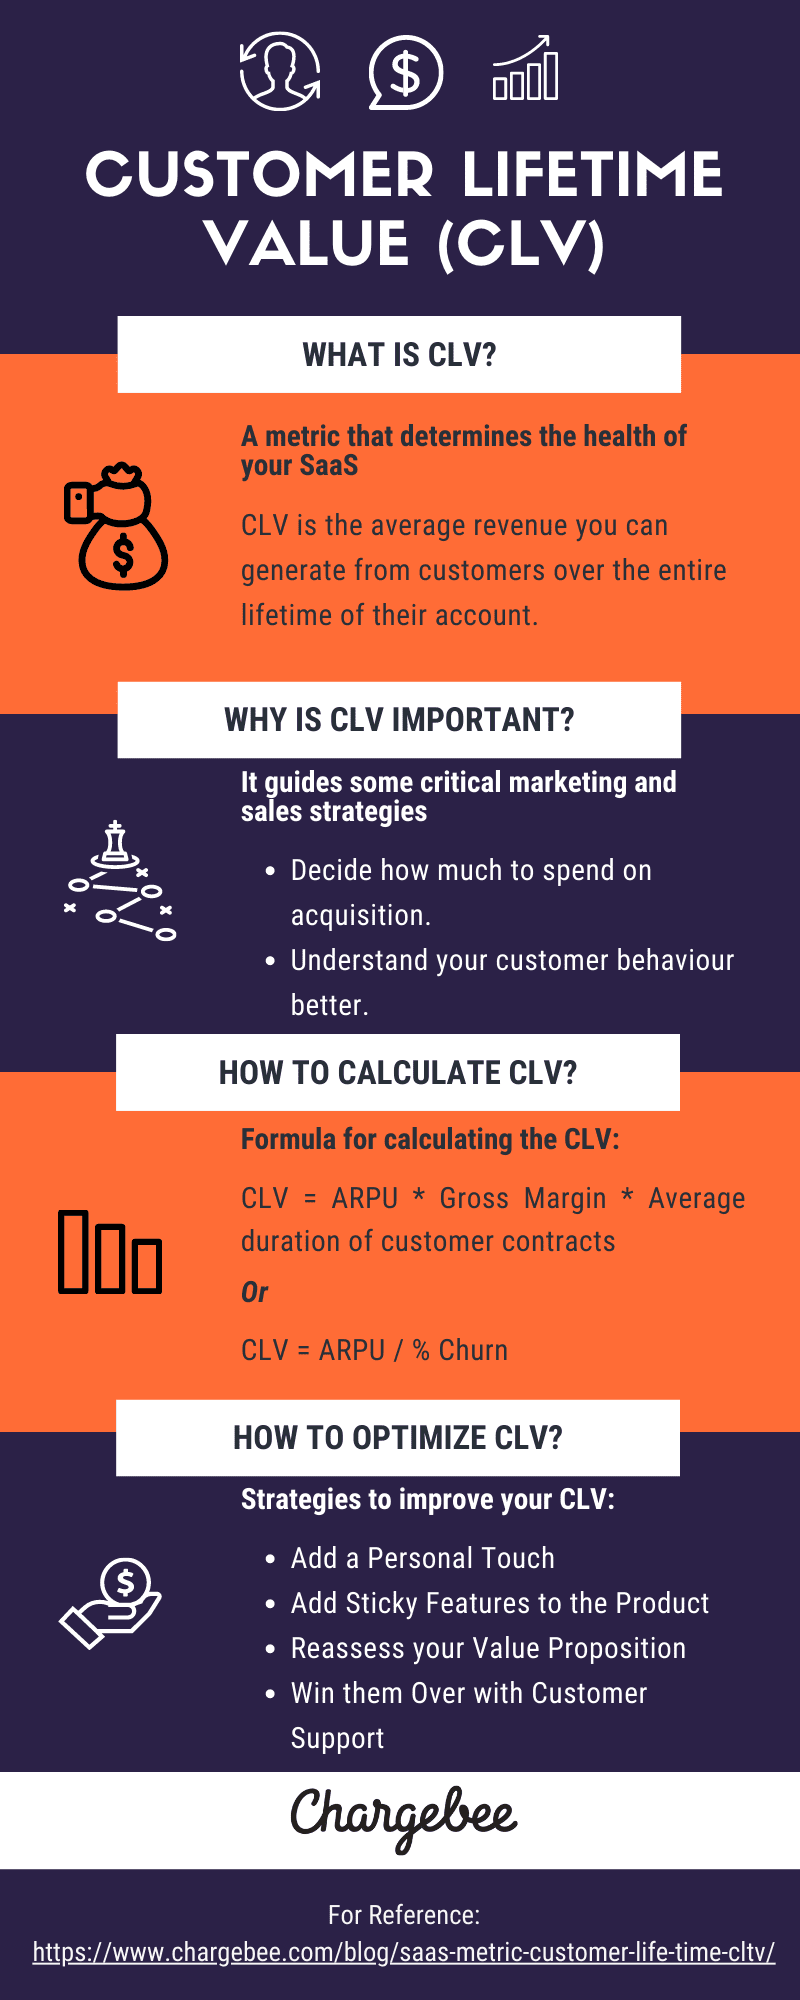 How to calculate and optimize customer lifetime value